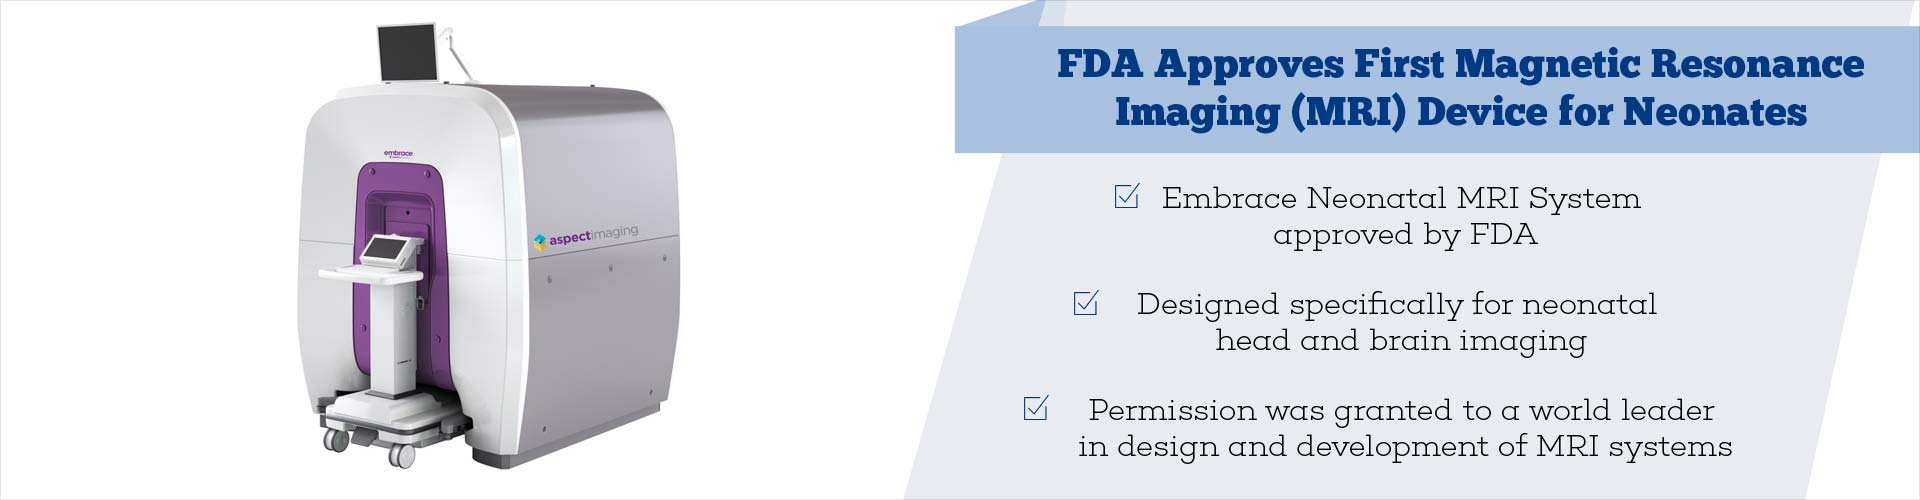 FDA Approves First Magnetic Resonance Imaging (MRI) Device for Neonates
- Embrace Neonatal (MRI) System approved by FDA
- Designed specifically for neonatal head and brain imaging
- Permission was granted to a world leader in design and development of MRI systems